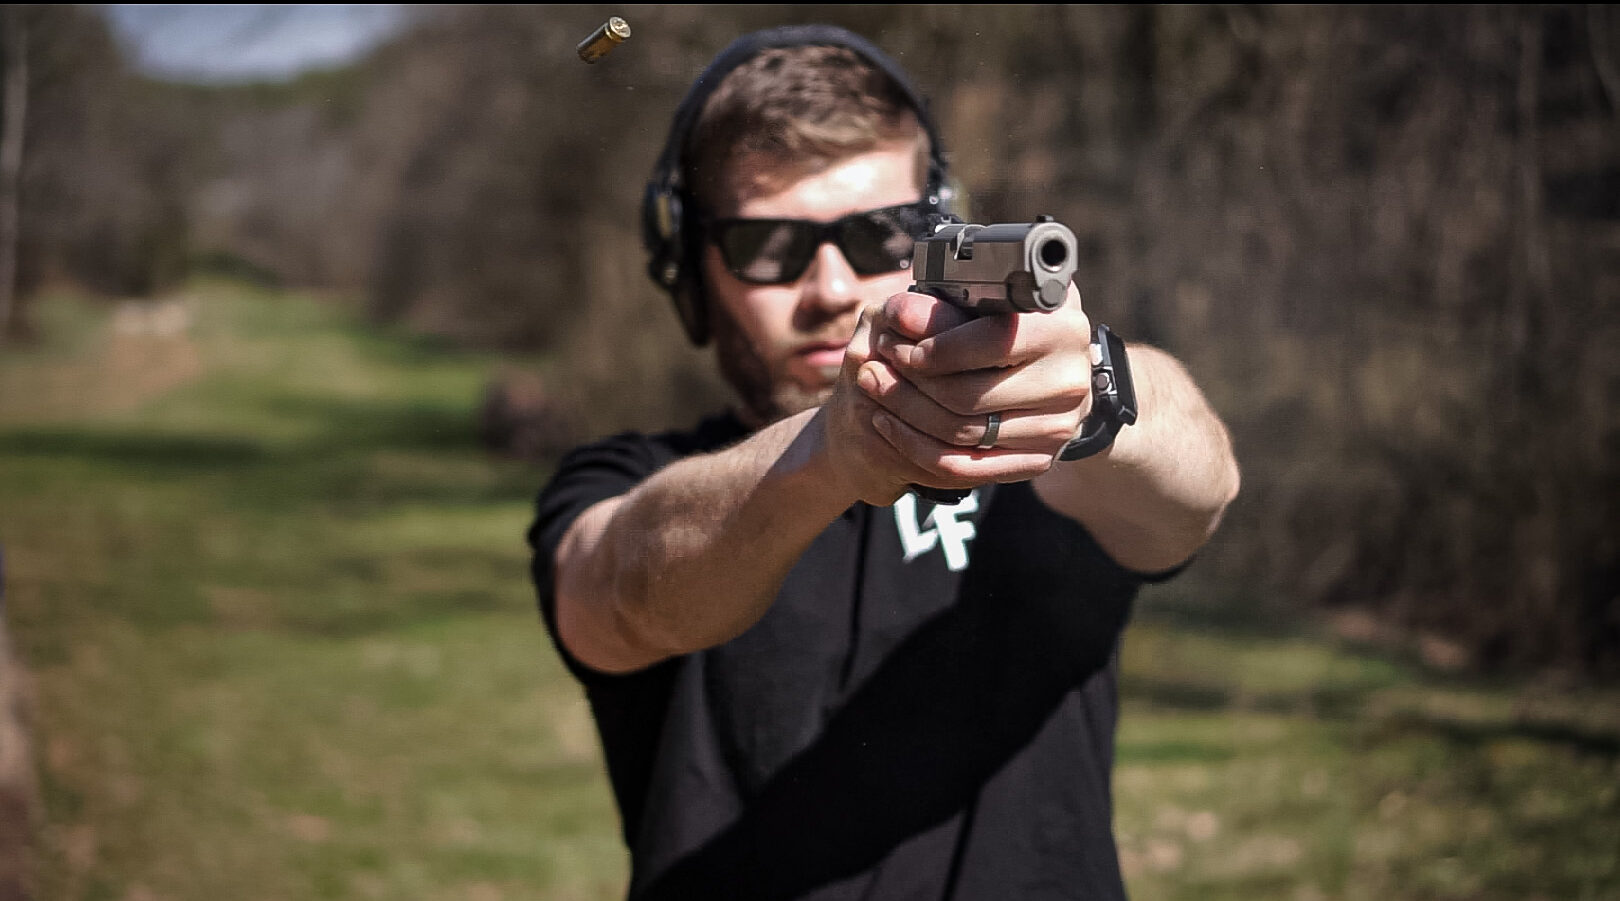 Nolan, the author firing Dan Wesson 1911 Classic as part of his pistol review